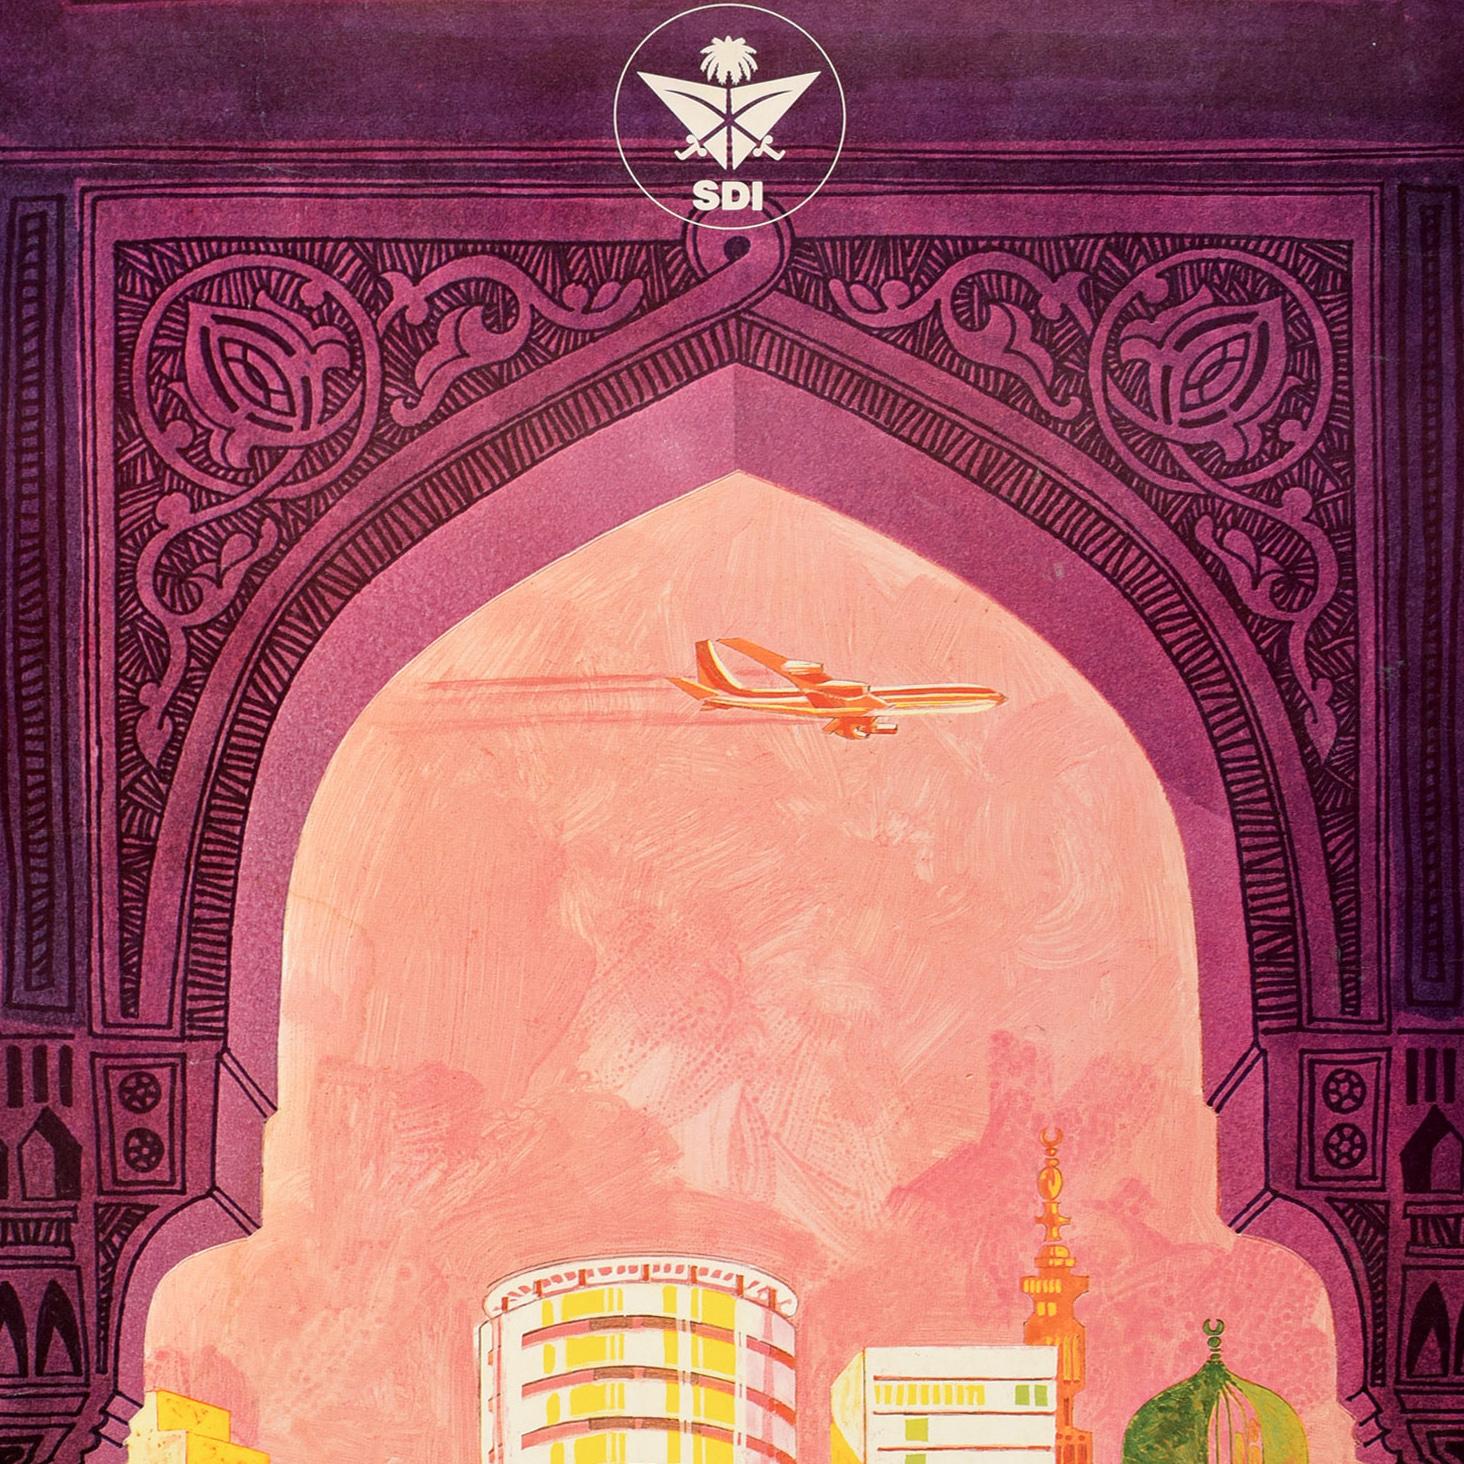 Original Vintage Middle East Travel Poster Saudi Arabian Airlines SDI Saudia - Print by Unknown